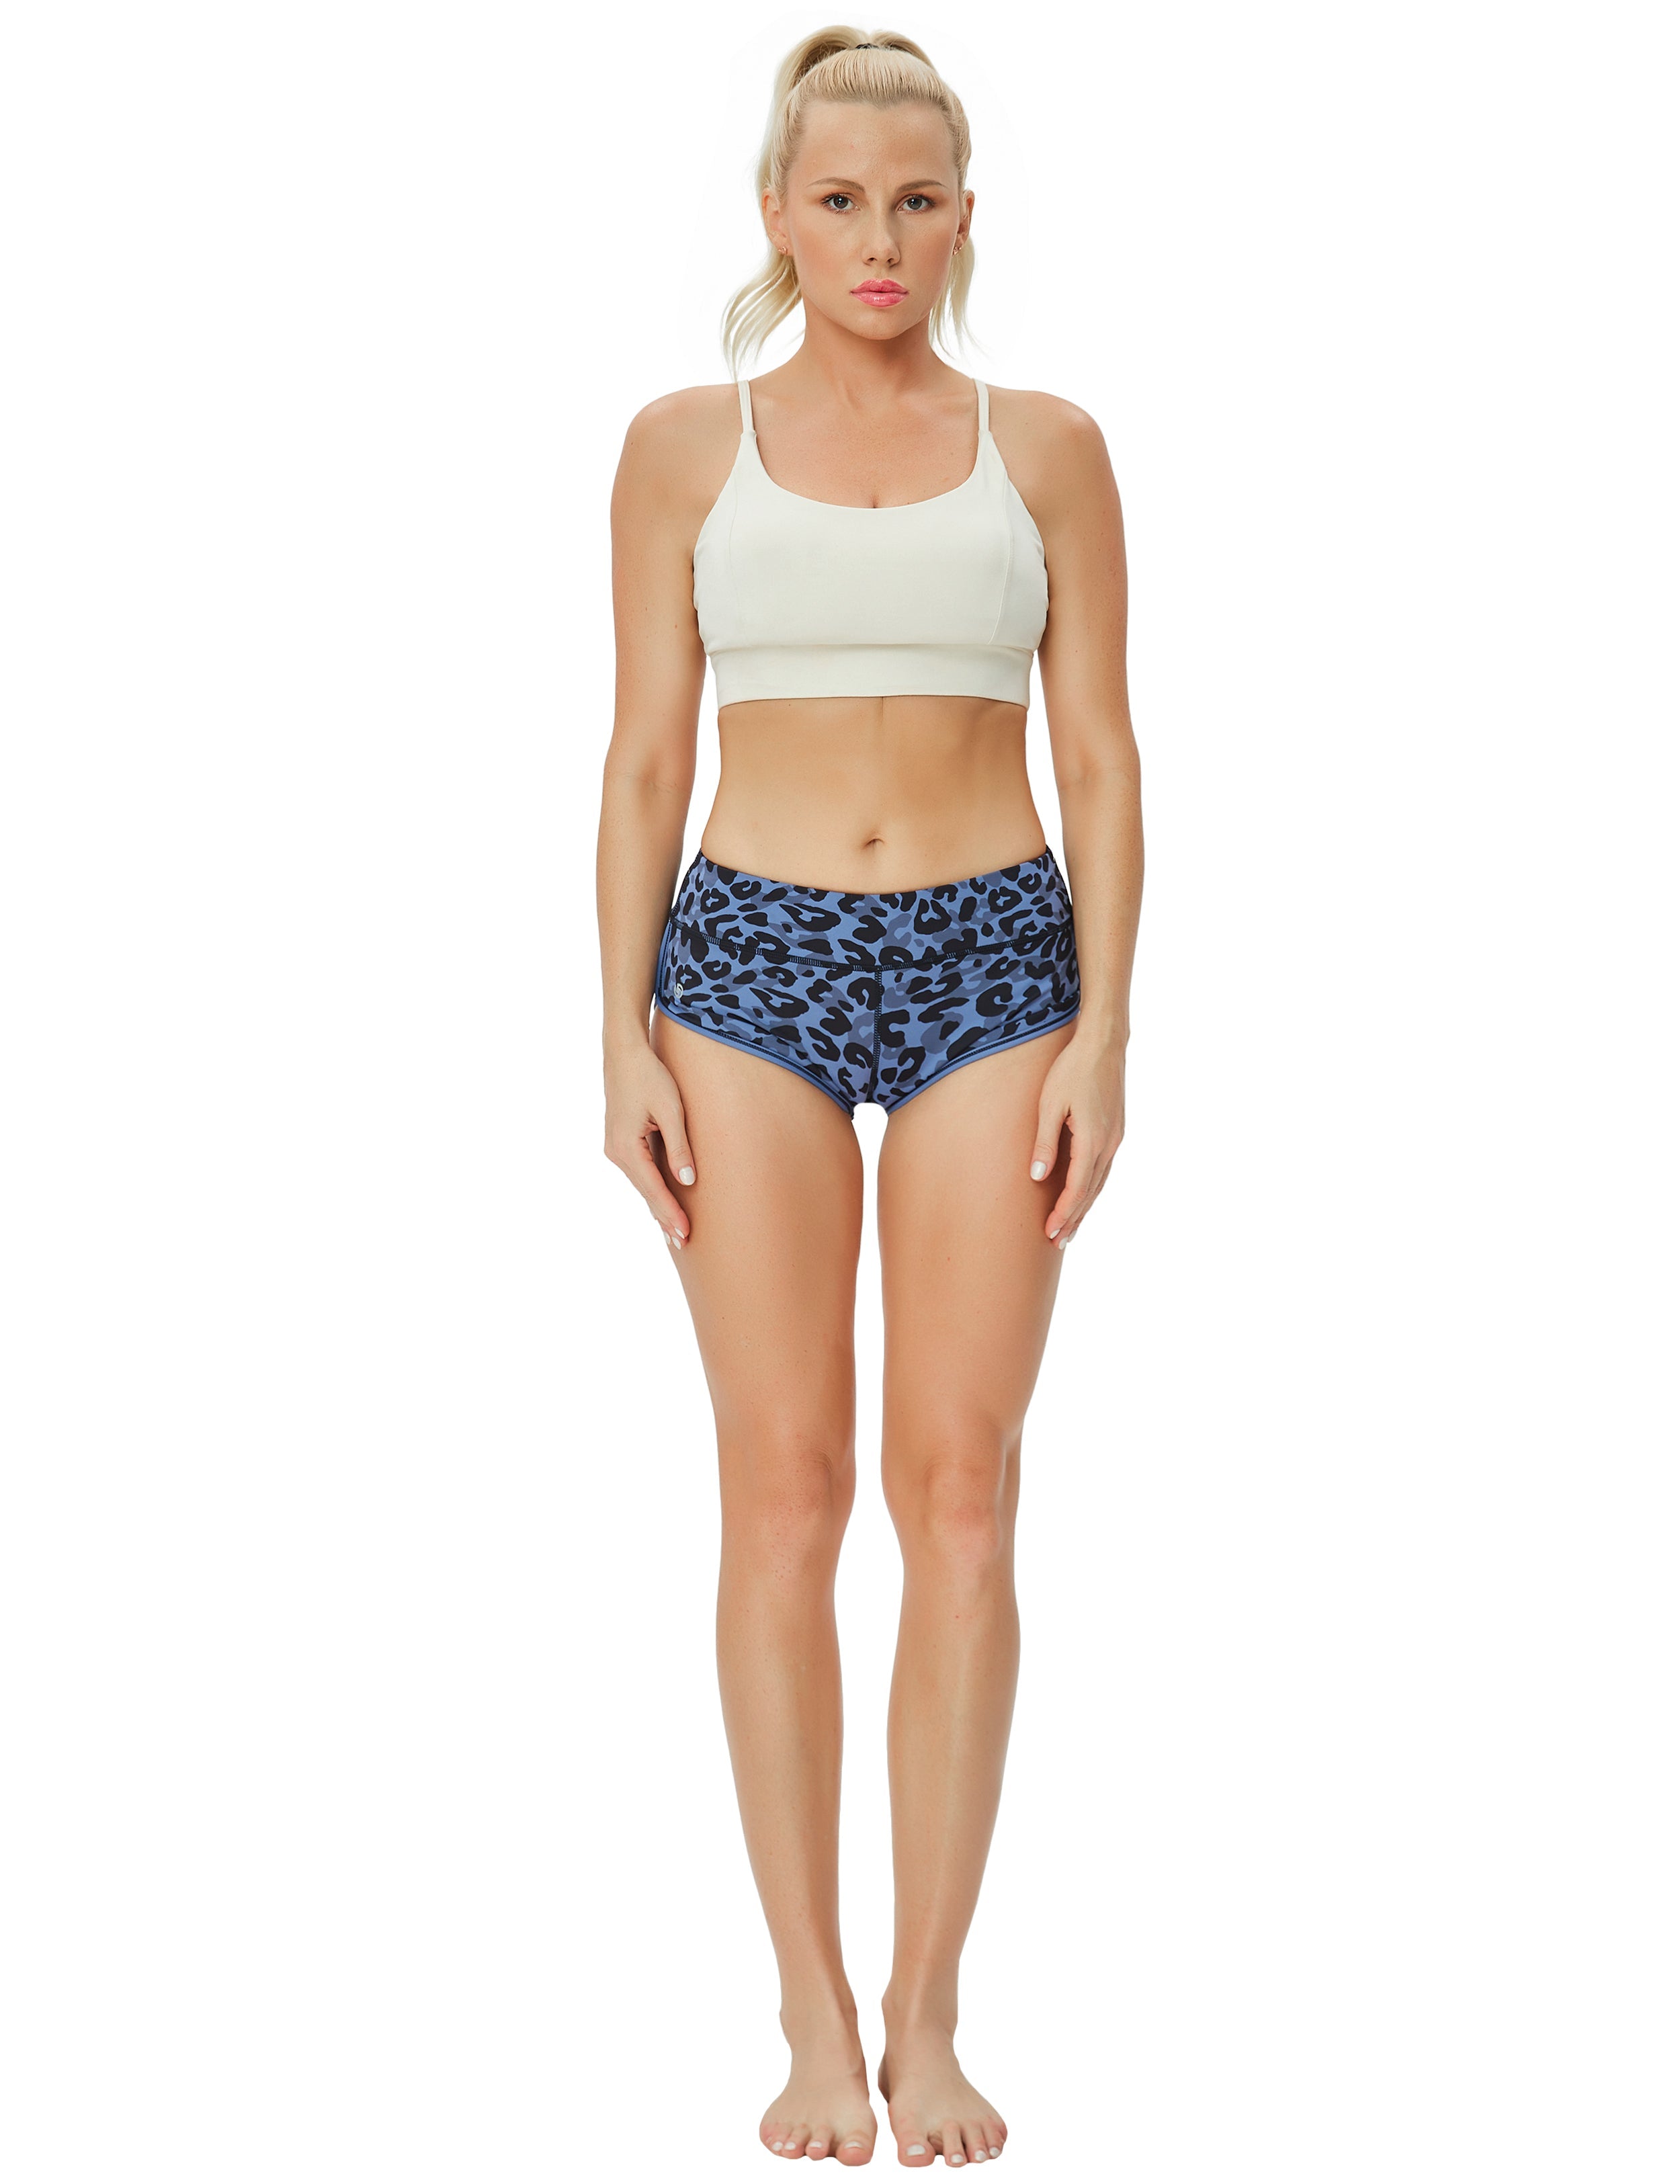 Printed Booty Jogging Shorts navy_leopard Sleek, soft, smooth and totally comfortable: our newest sexy style is here. Softest-ever fabric High elasticity High density 4-way stretch Fabric doesn't attract lint easily No see-through Moisture-wicking Machine wash 78% Polyester, 22% Spandex